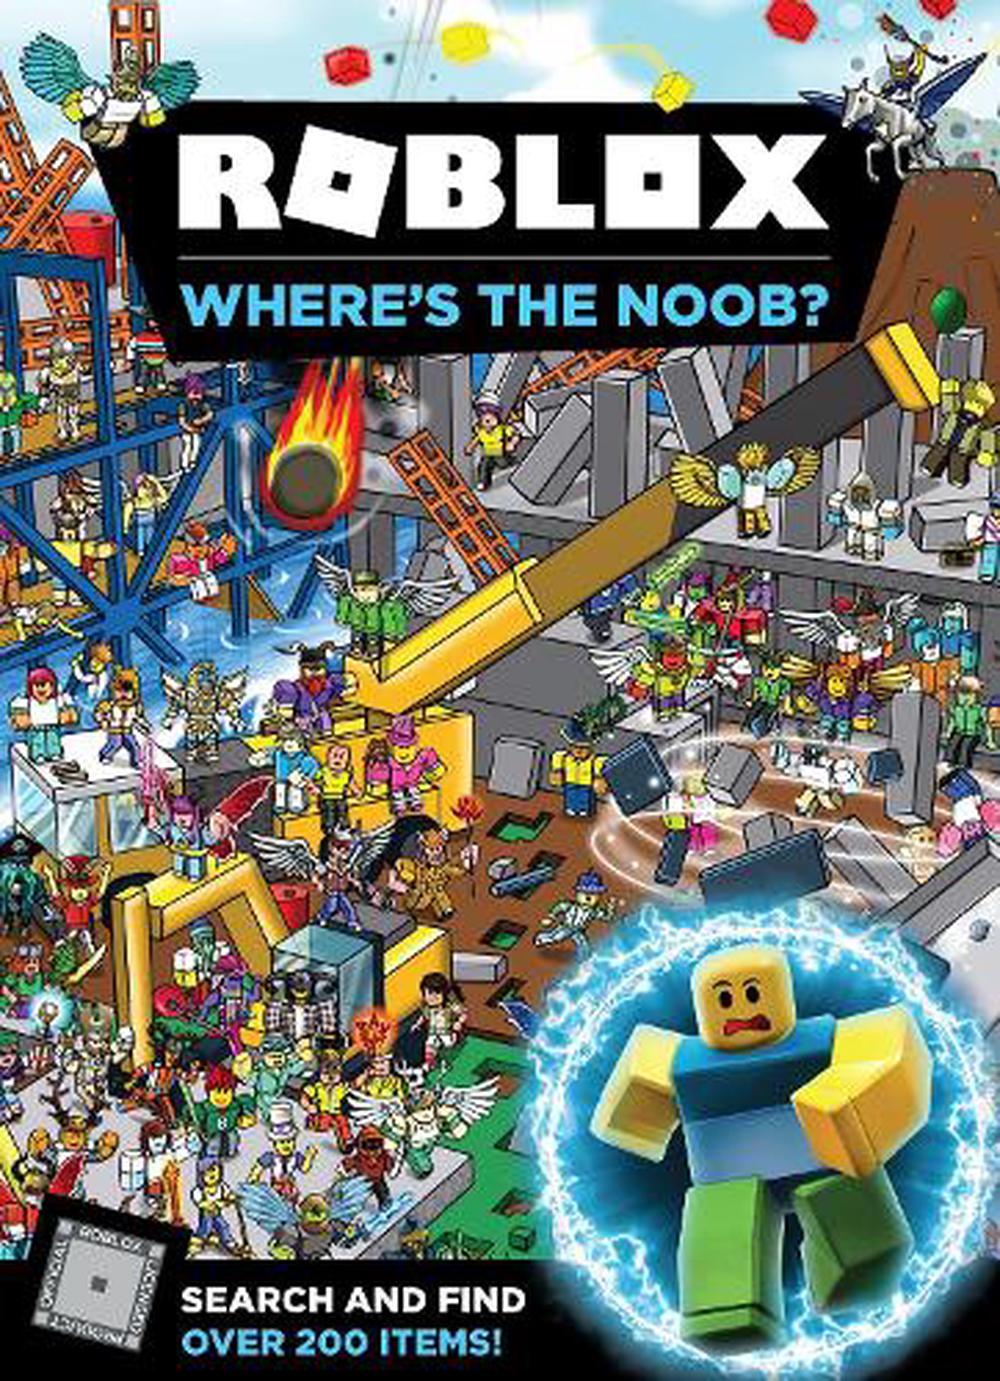 Roblox Where S The Noob Search And Find Book By Egmont Publishing Uk Hardcover 9781405294638 Buy Online At The Nile - wheres the baby roblox action figure